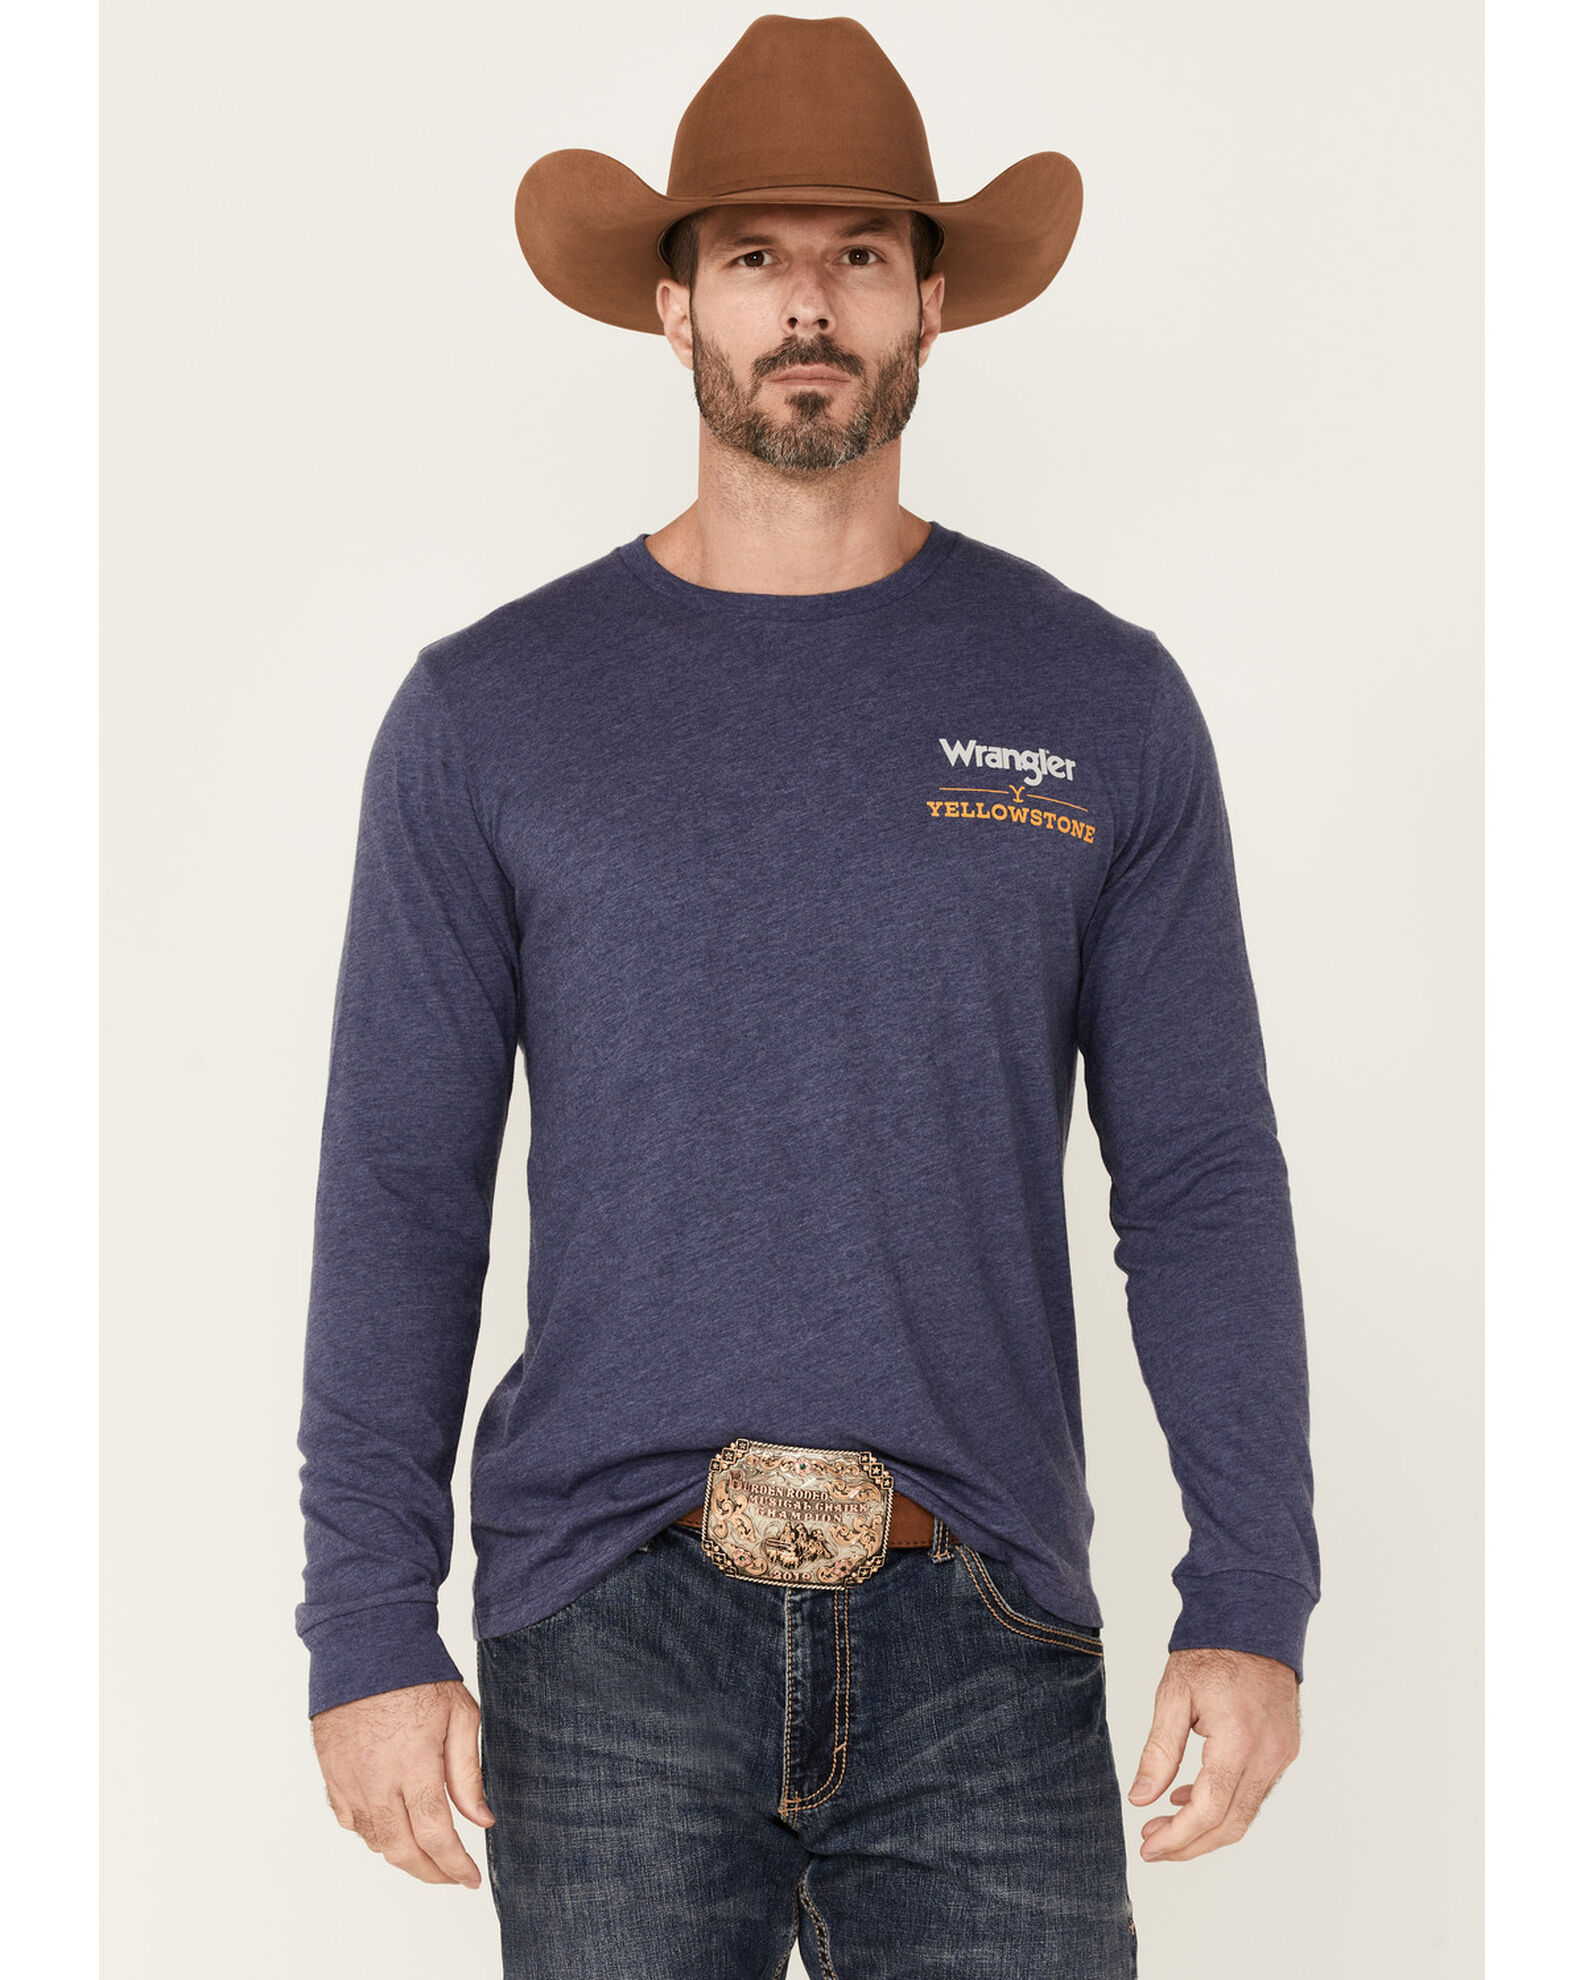 Wrangler Men's Yellowstone Dutton Ranch Graphic Long Sleeve T-Shirt -  Heather Navy - Country Outfitter